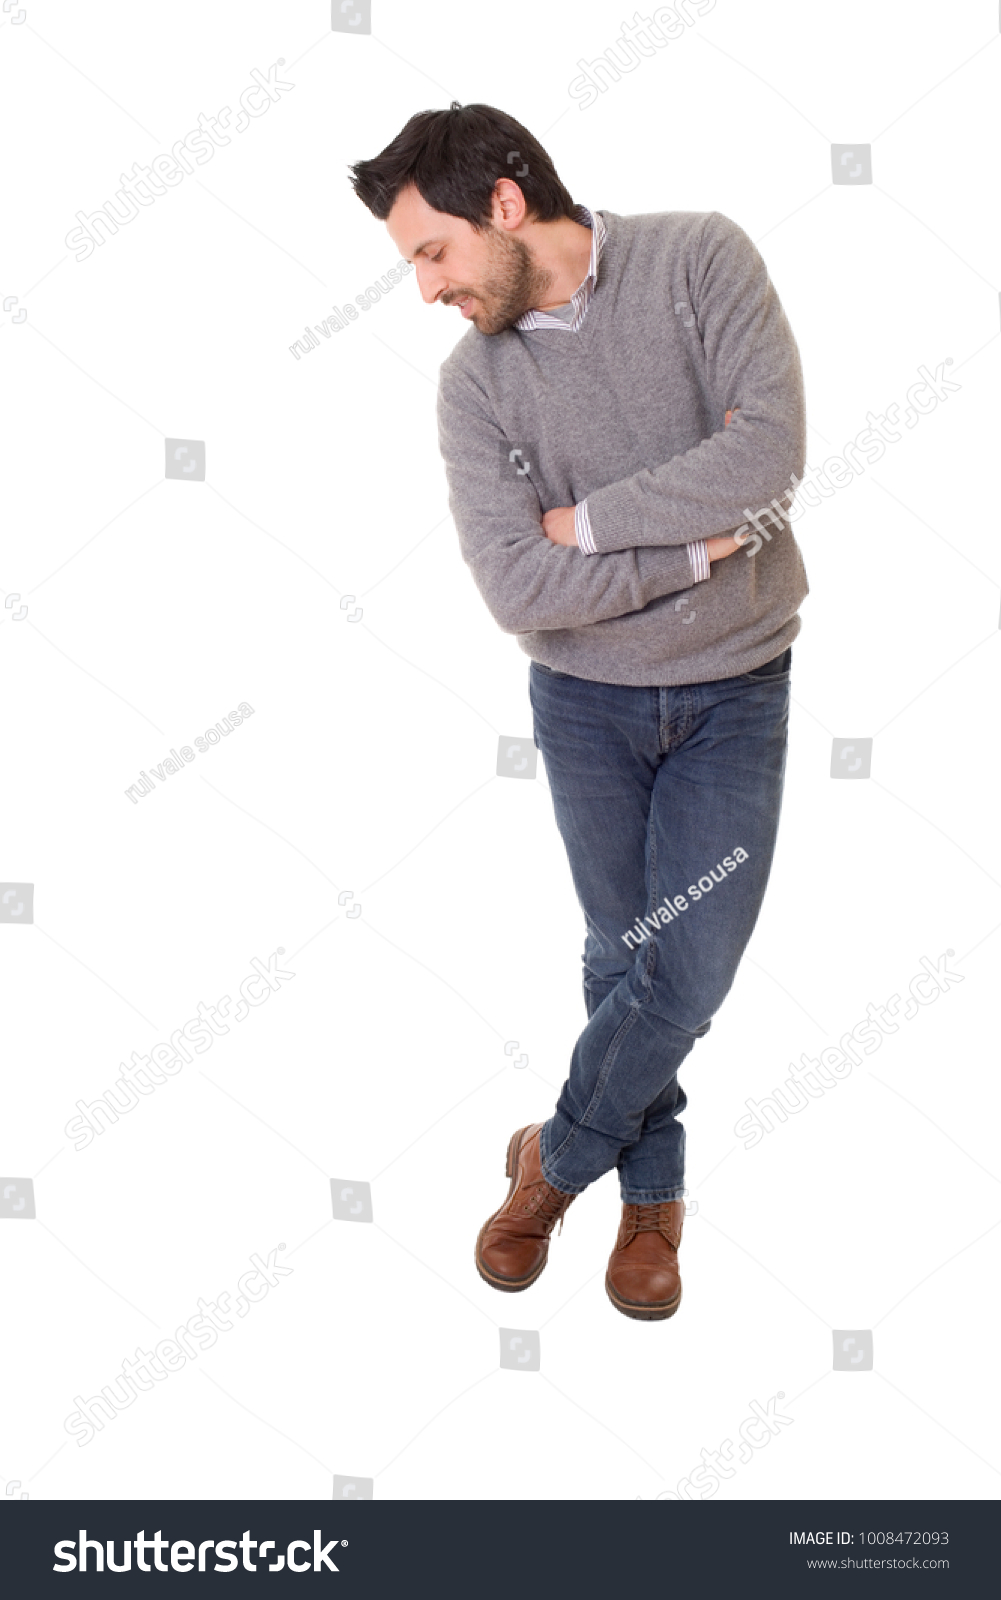 happy casual man full body in a white background #1008472093